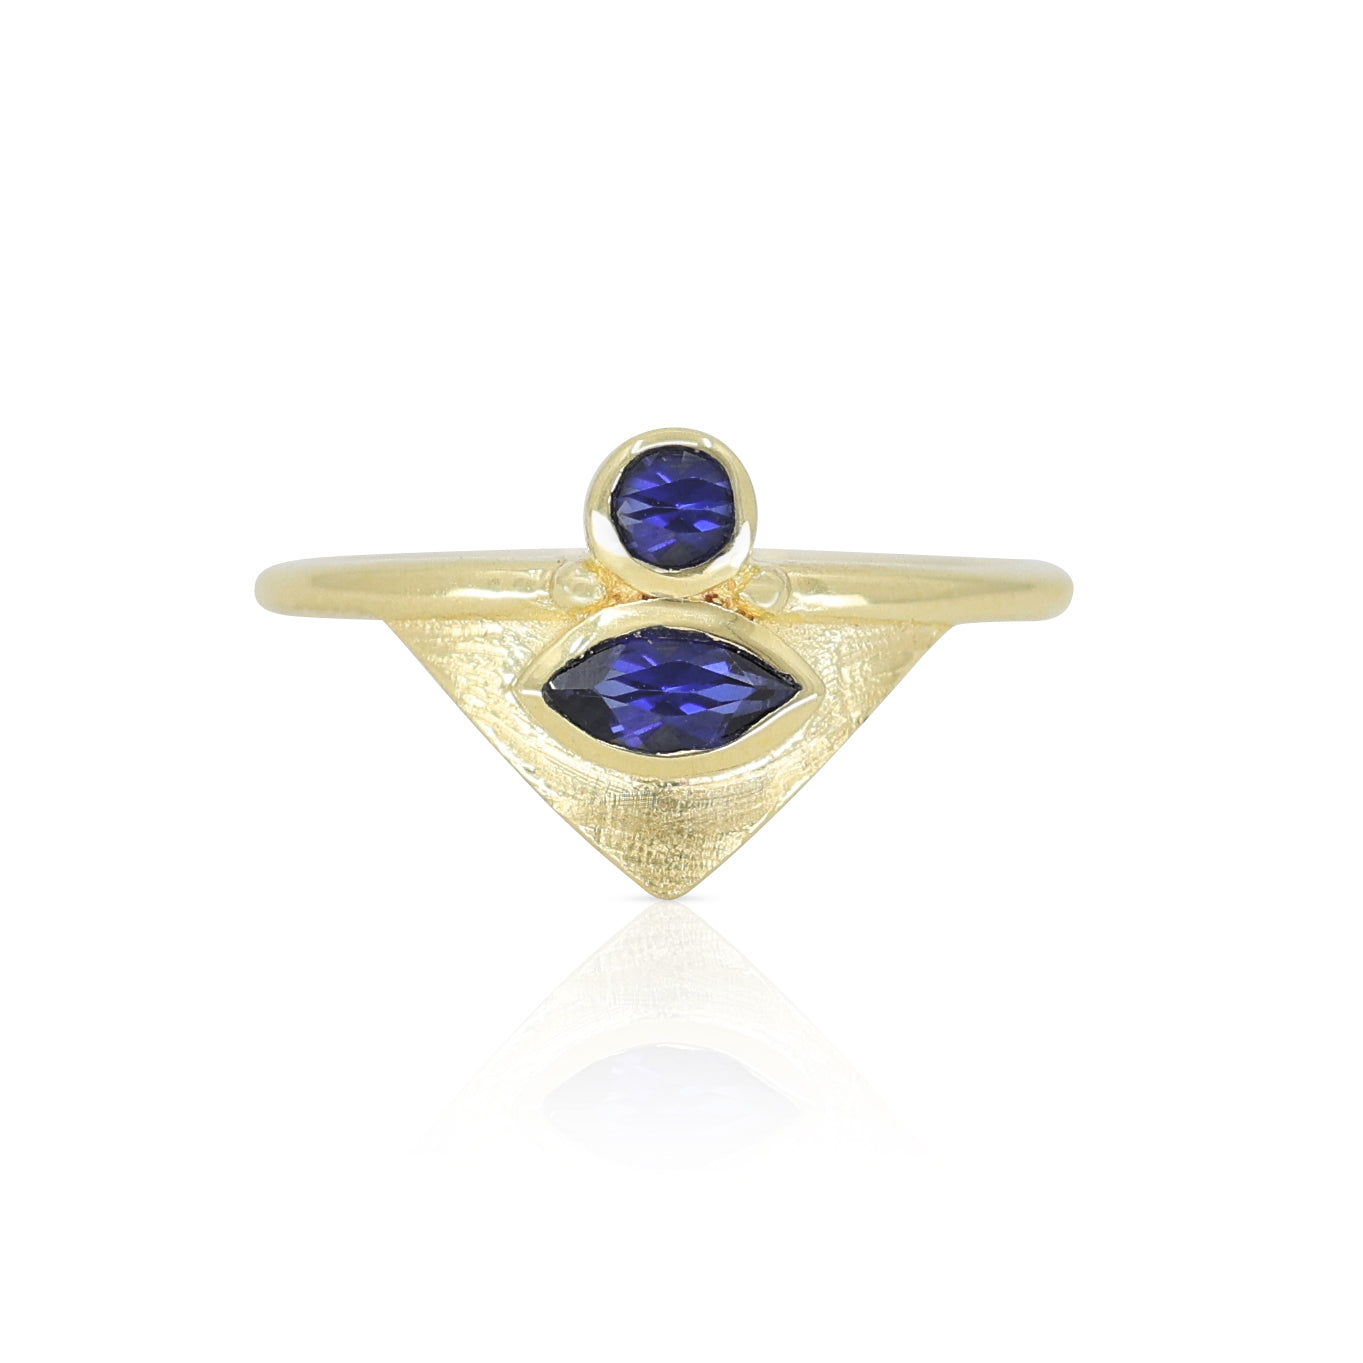 The Nile Sapphire Gold Ring